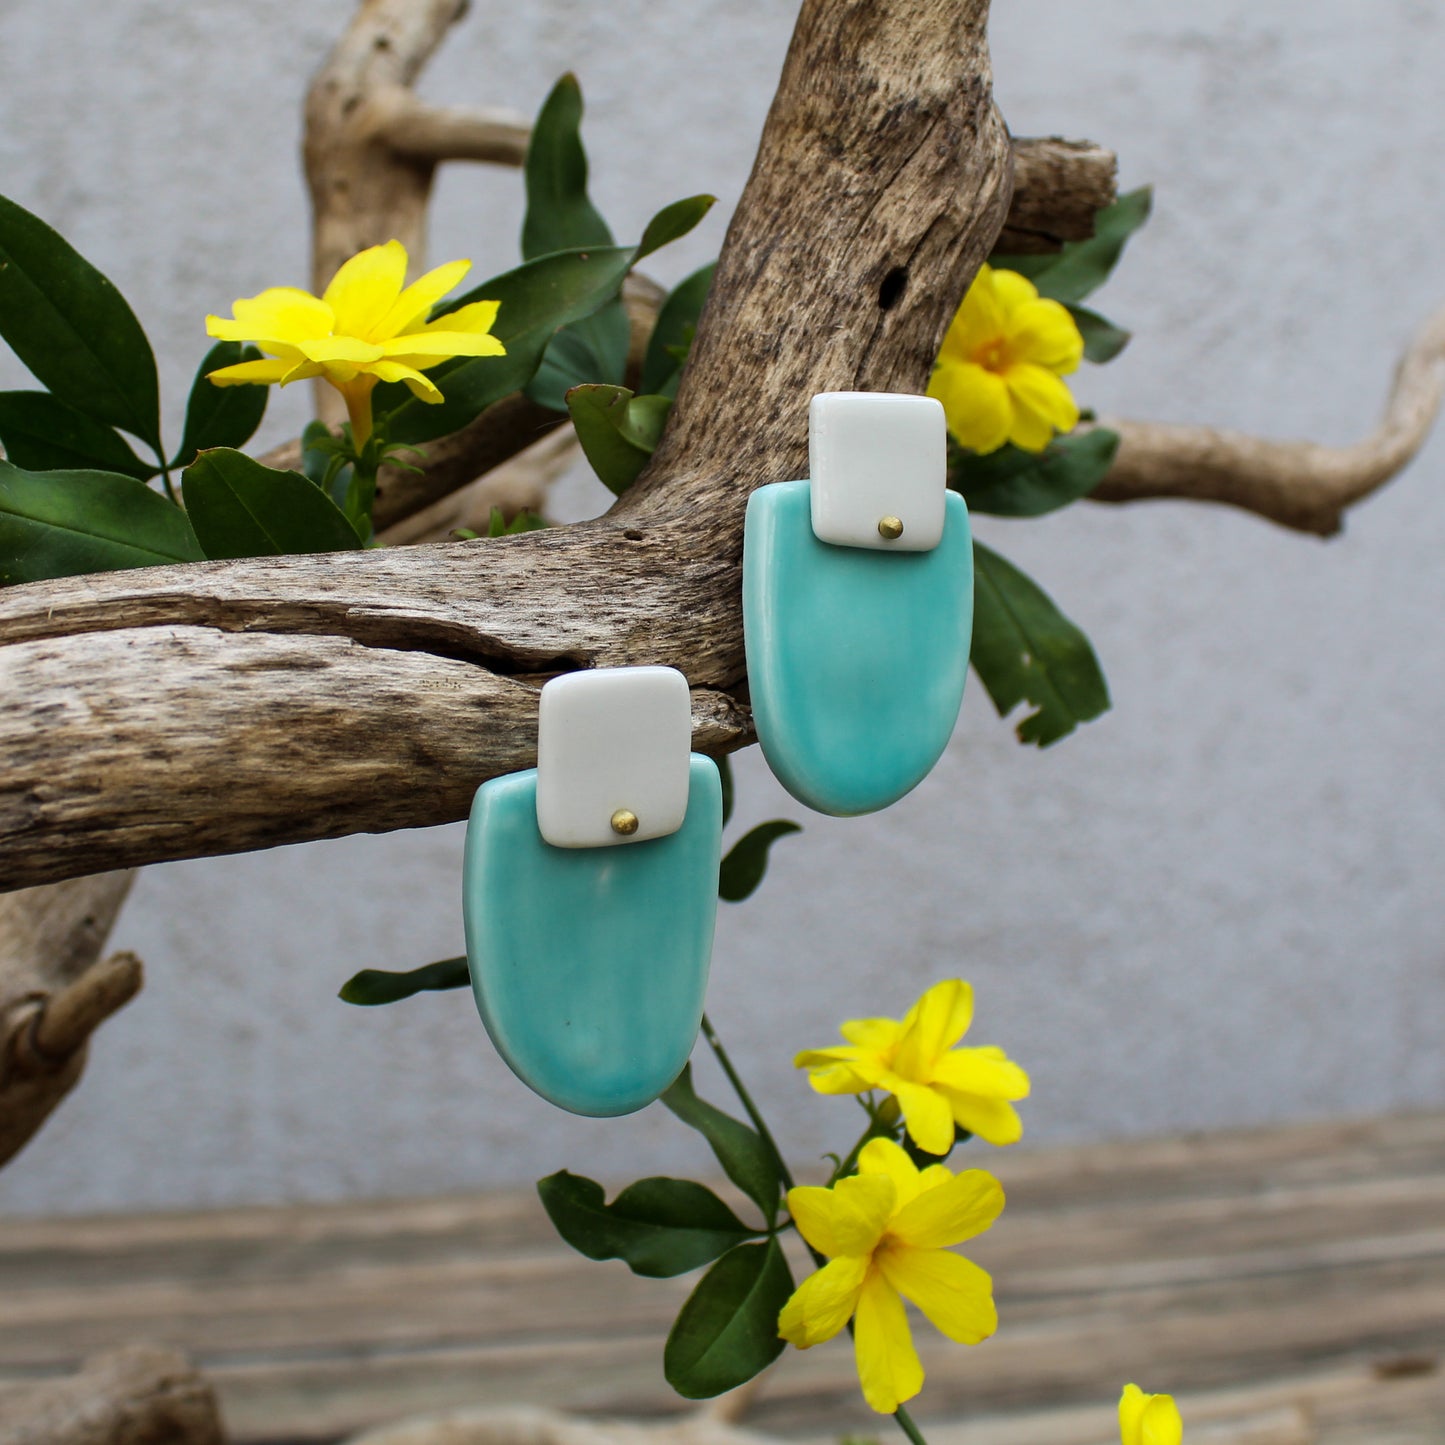 Stud statement porcelain earrings in white and aquamarine color